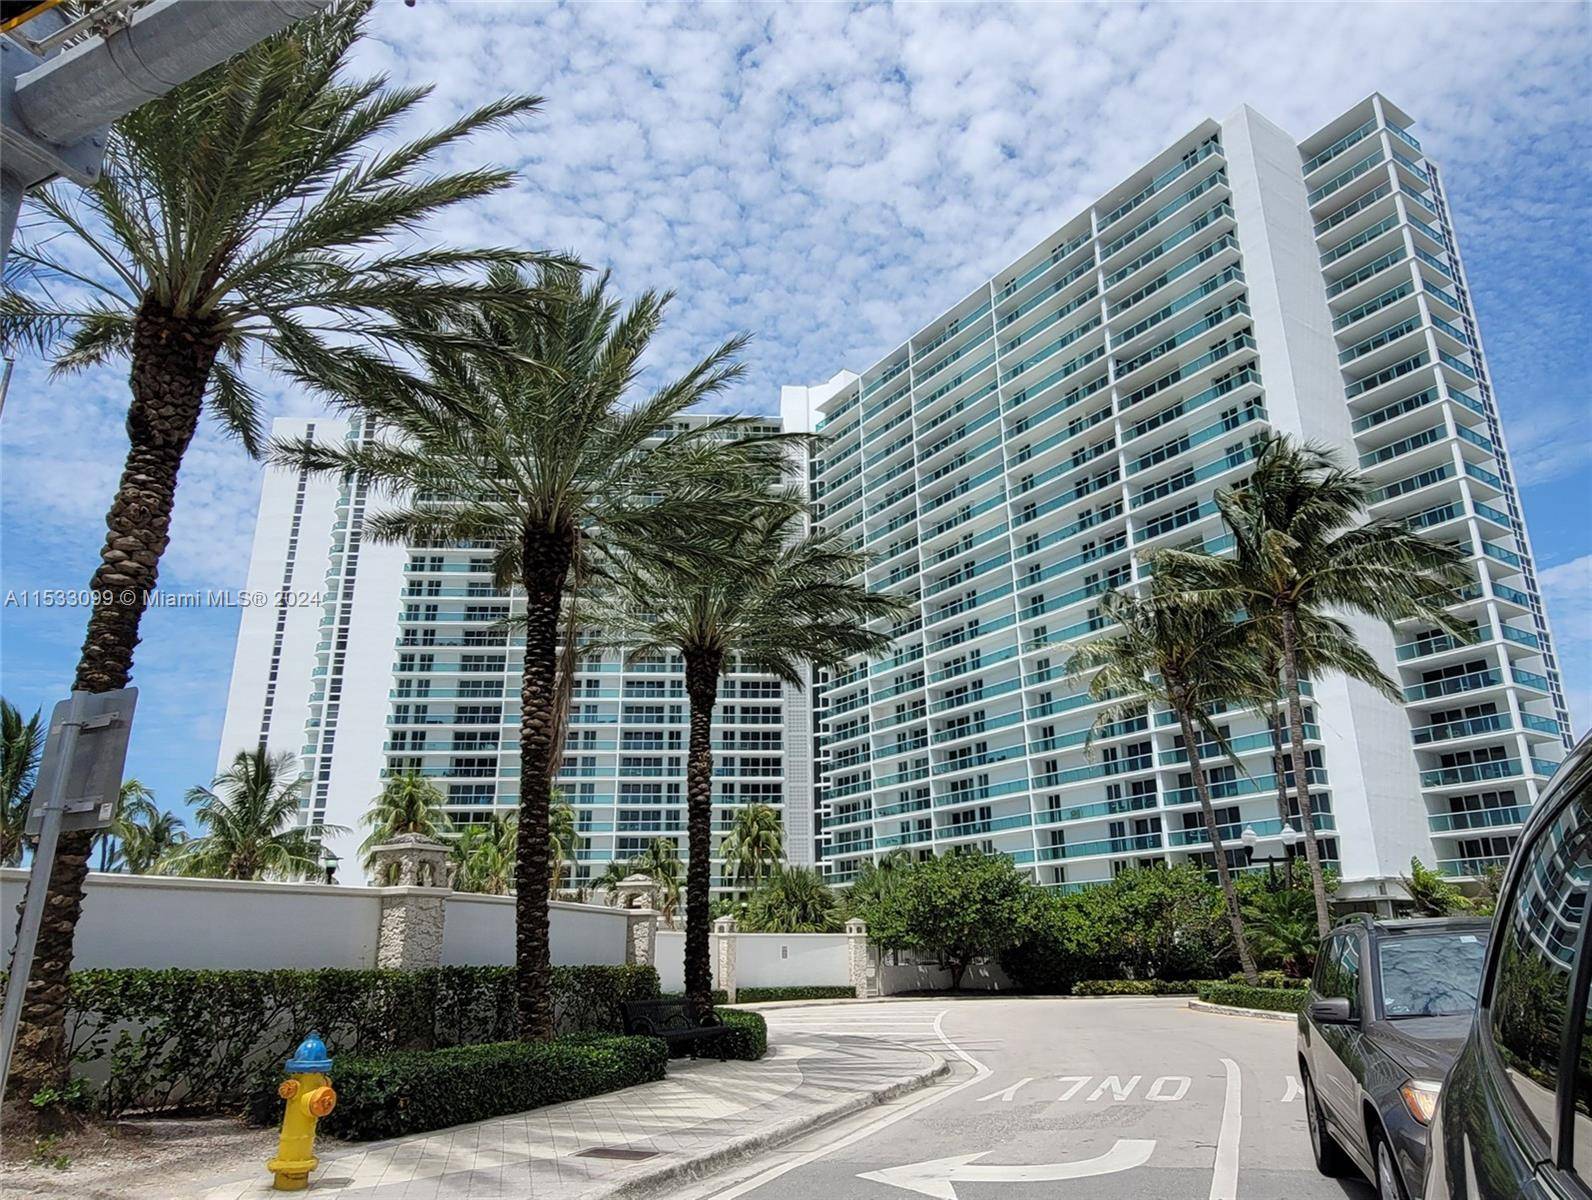 Remodeled and fully furnished condo unit featuring 2b 2b in Sunny Isles Beach, across the ocean.